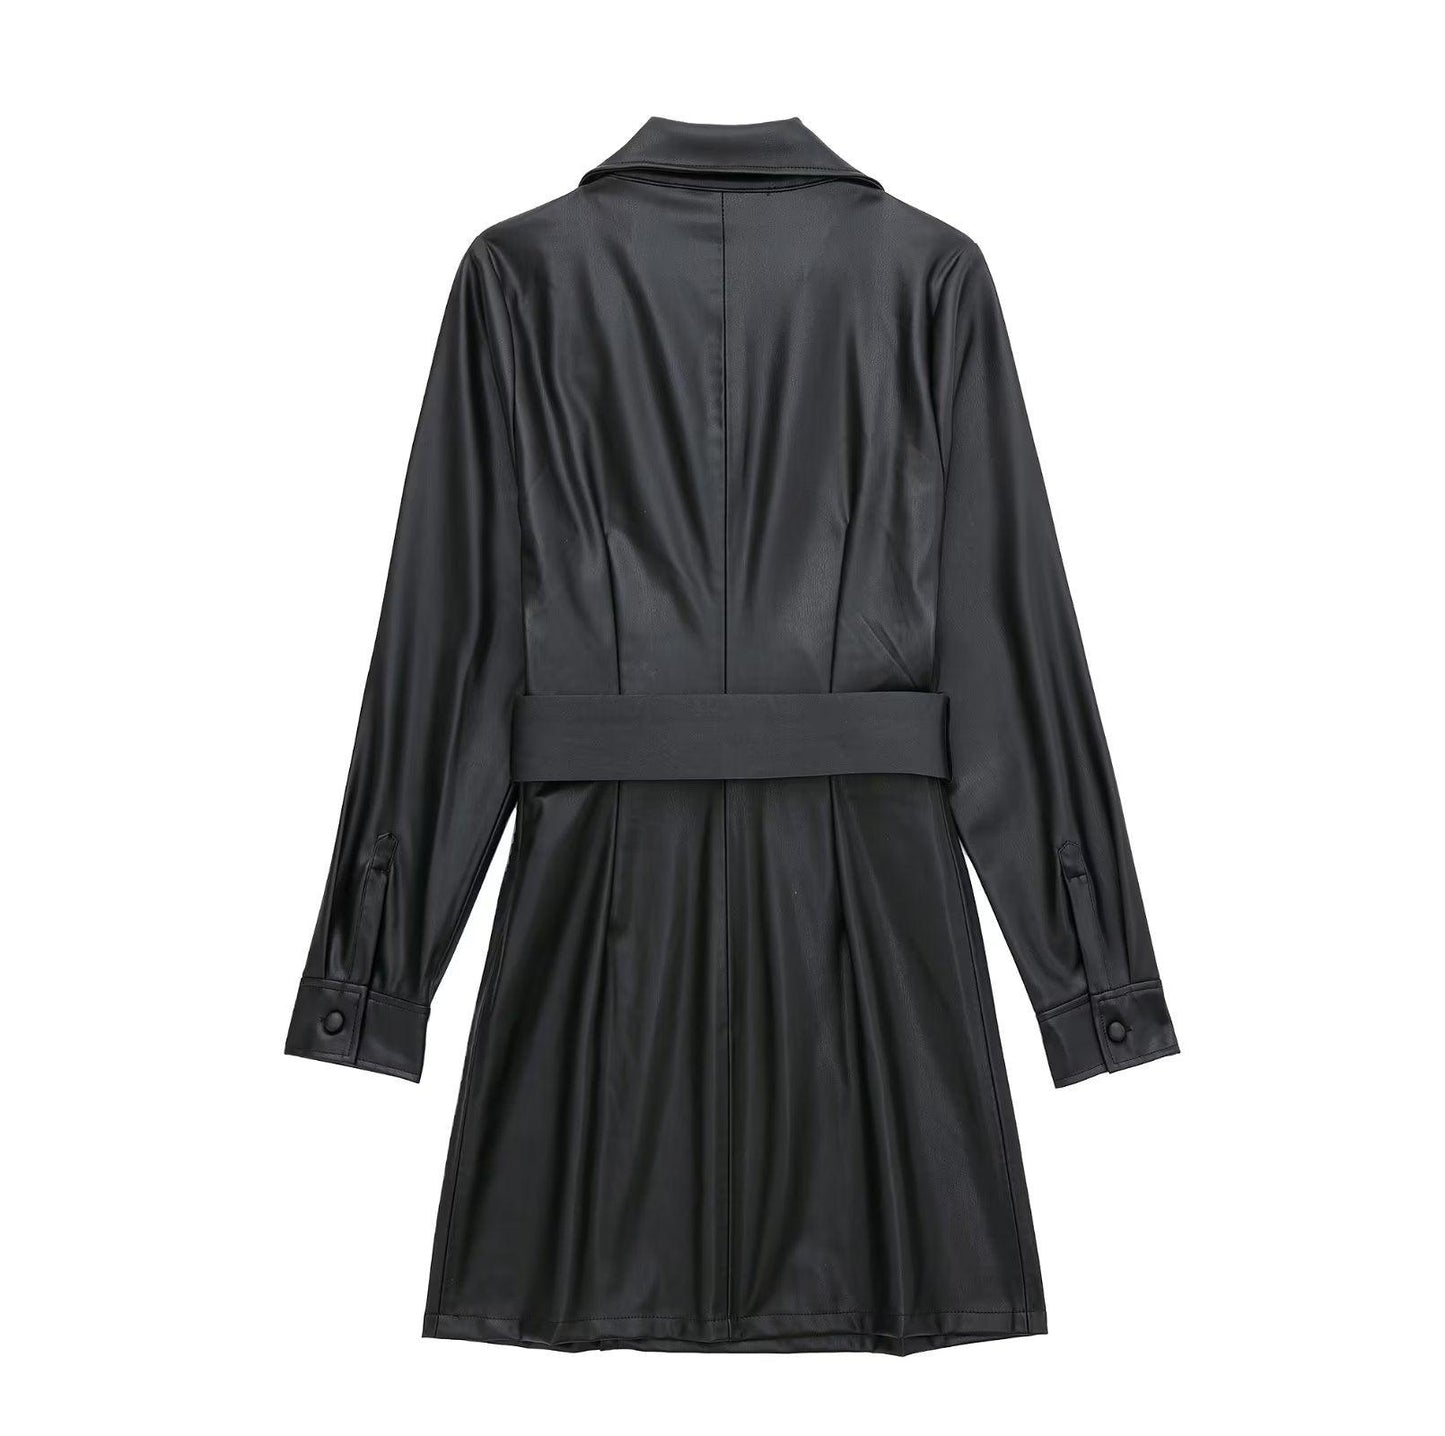 Make a Statement with our Faux Leather Blazer Dress - ForVanity dress, Office Dress Office Dress